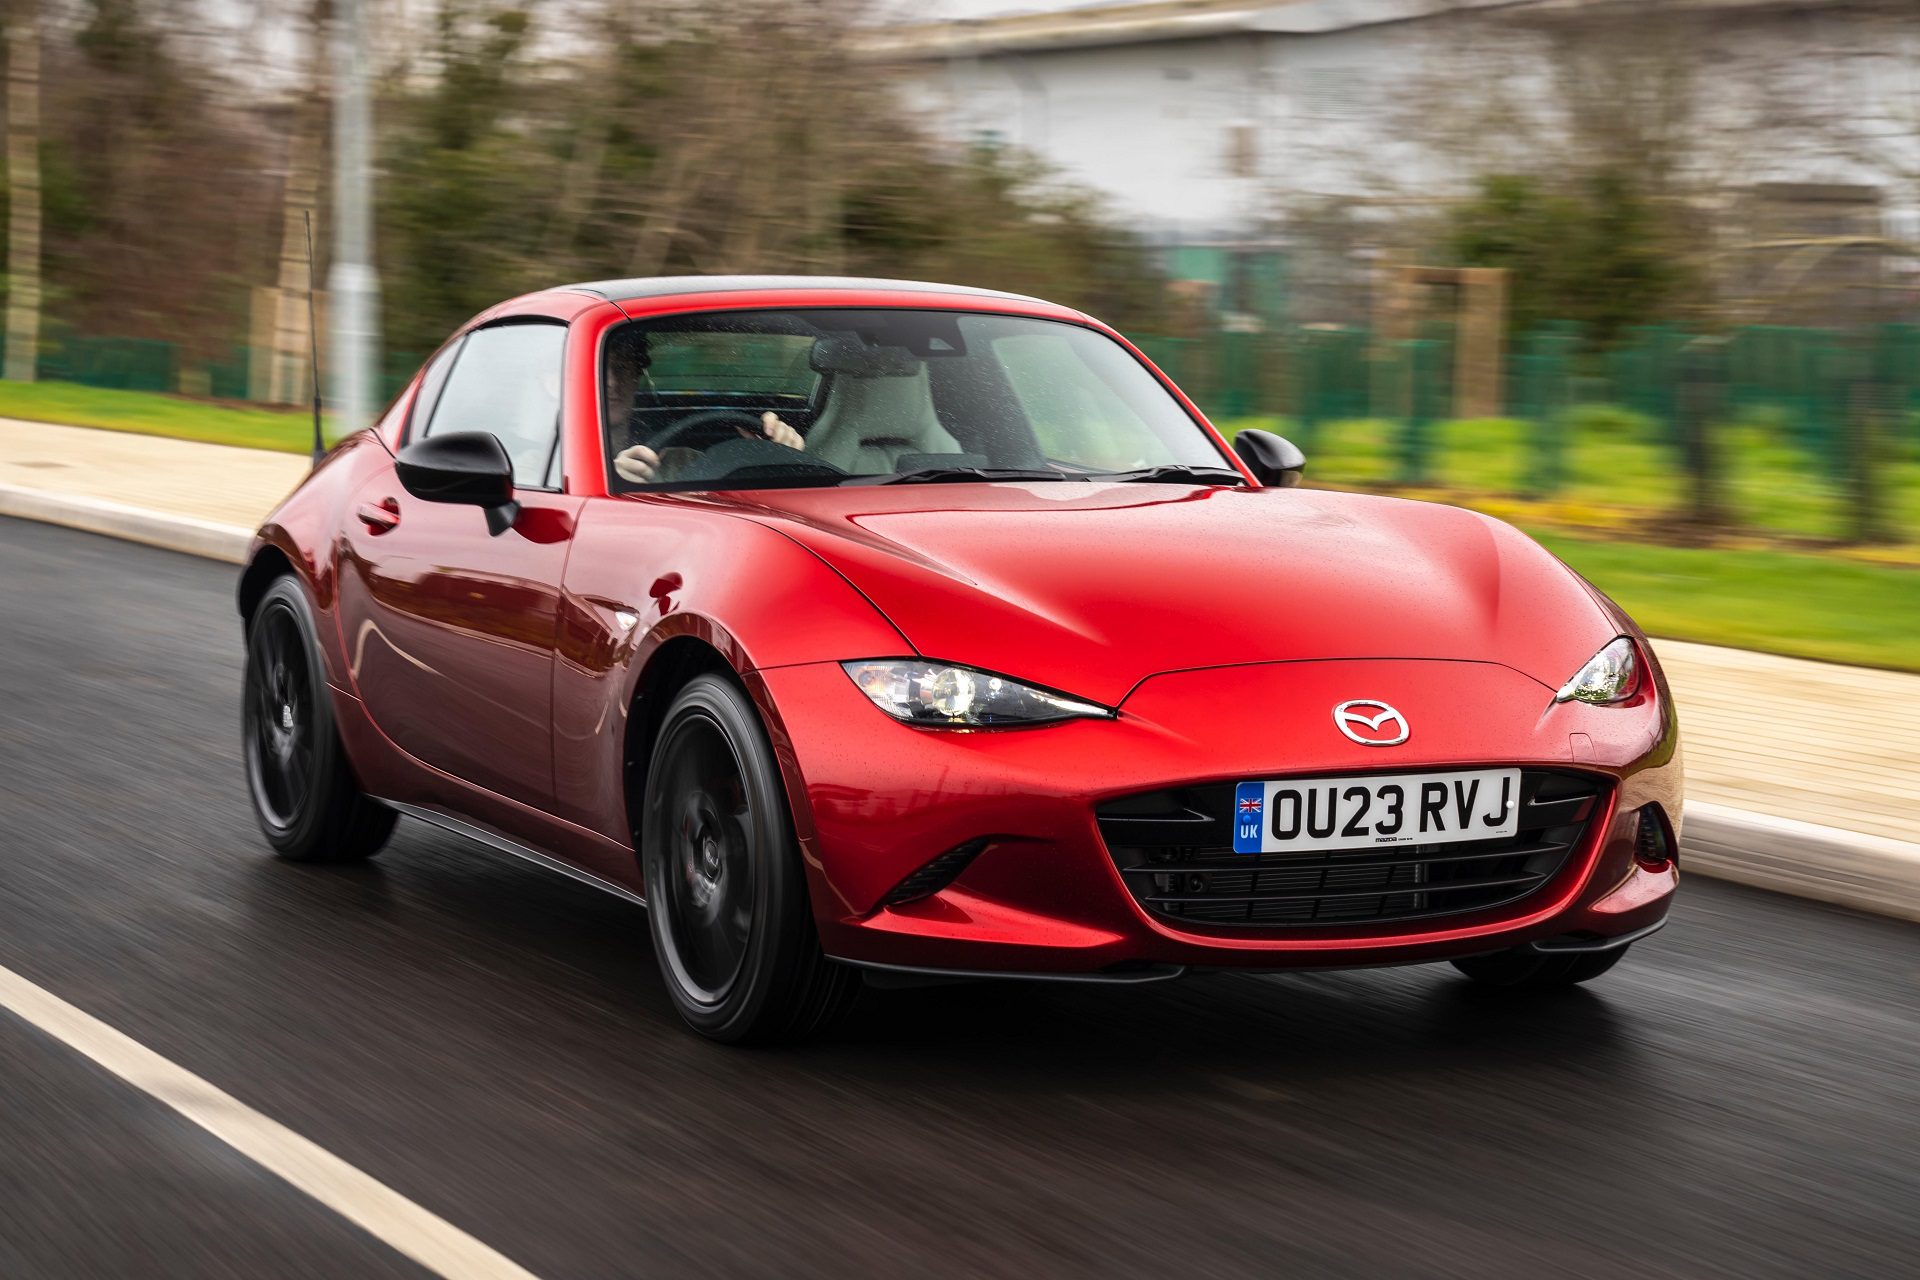 Front angled view of a red 2023 Mazda MX-5 Miata